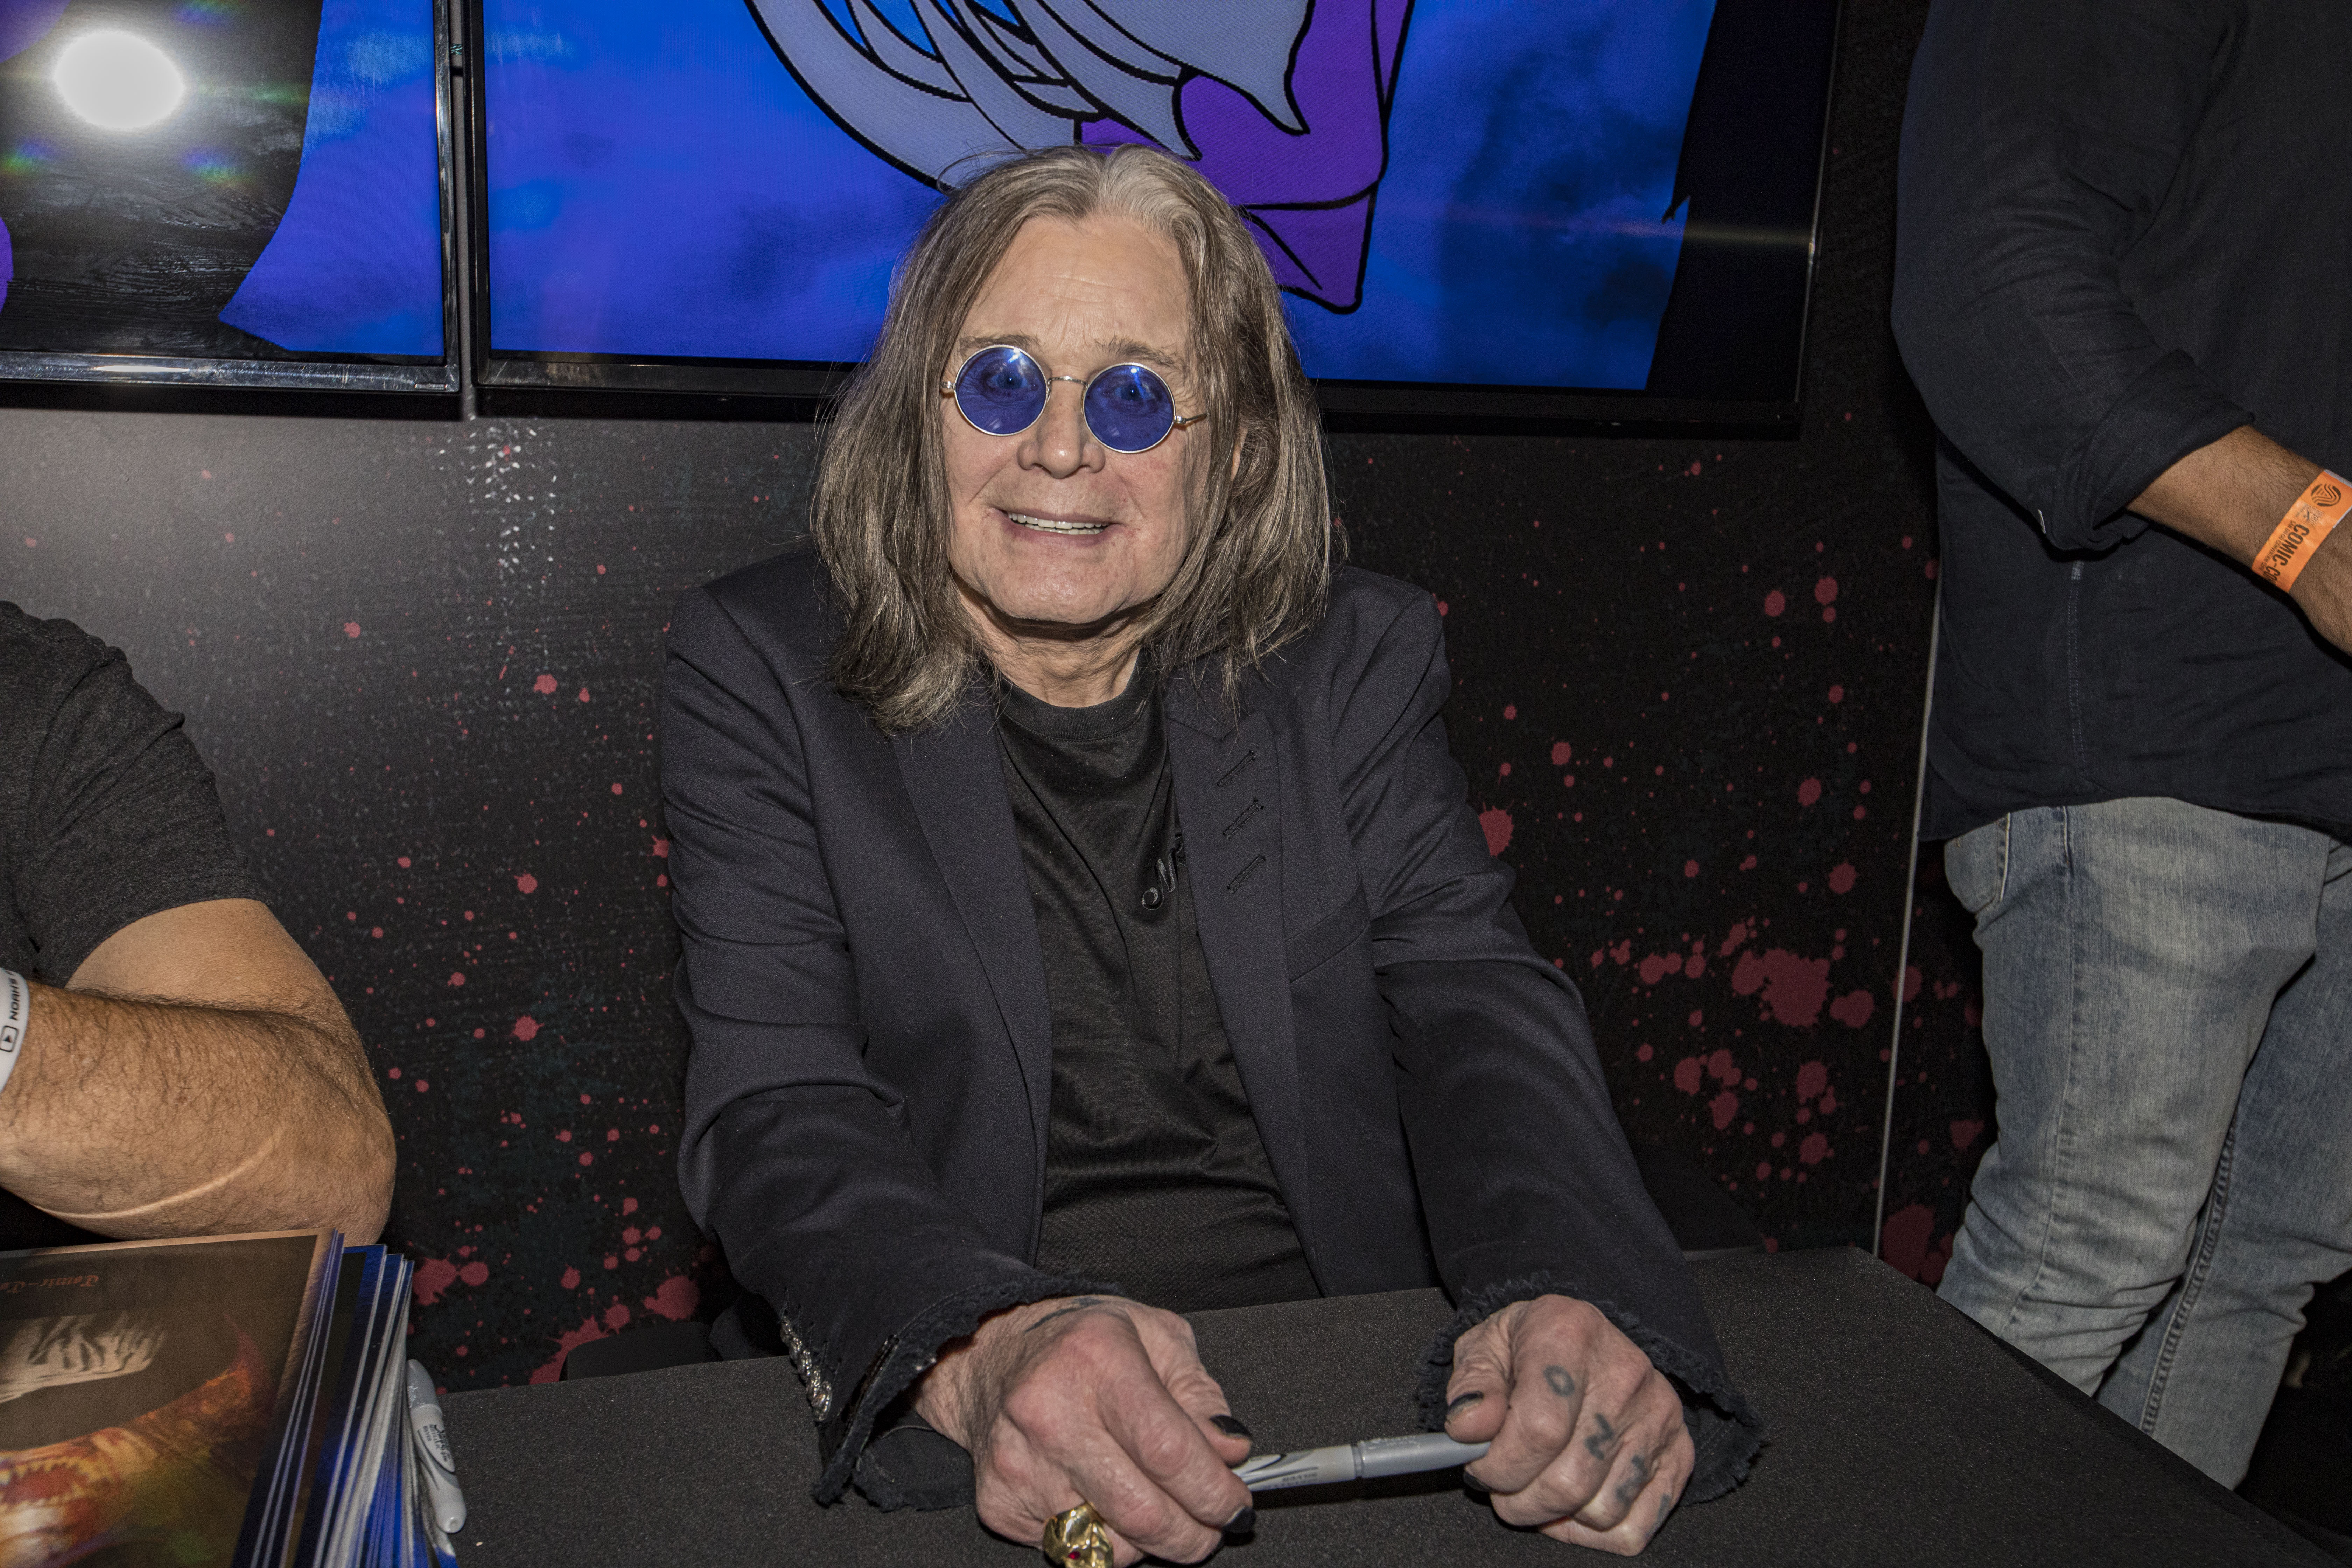 Ozzy Osbourne at Comic-Con International in San Diego, 2022 | Source: Getty Images